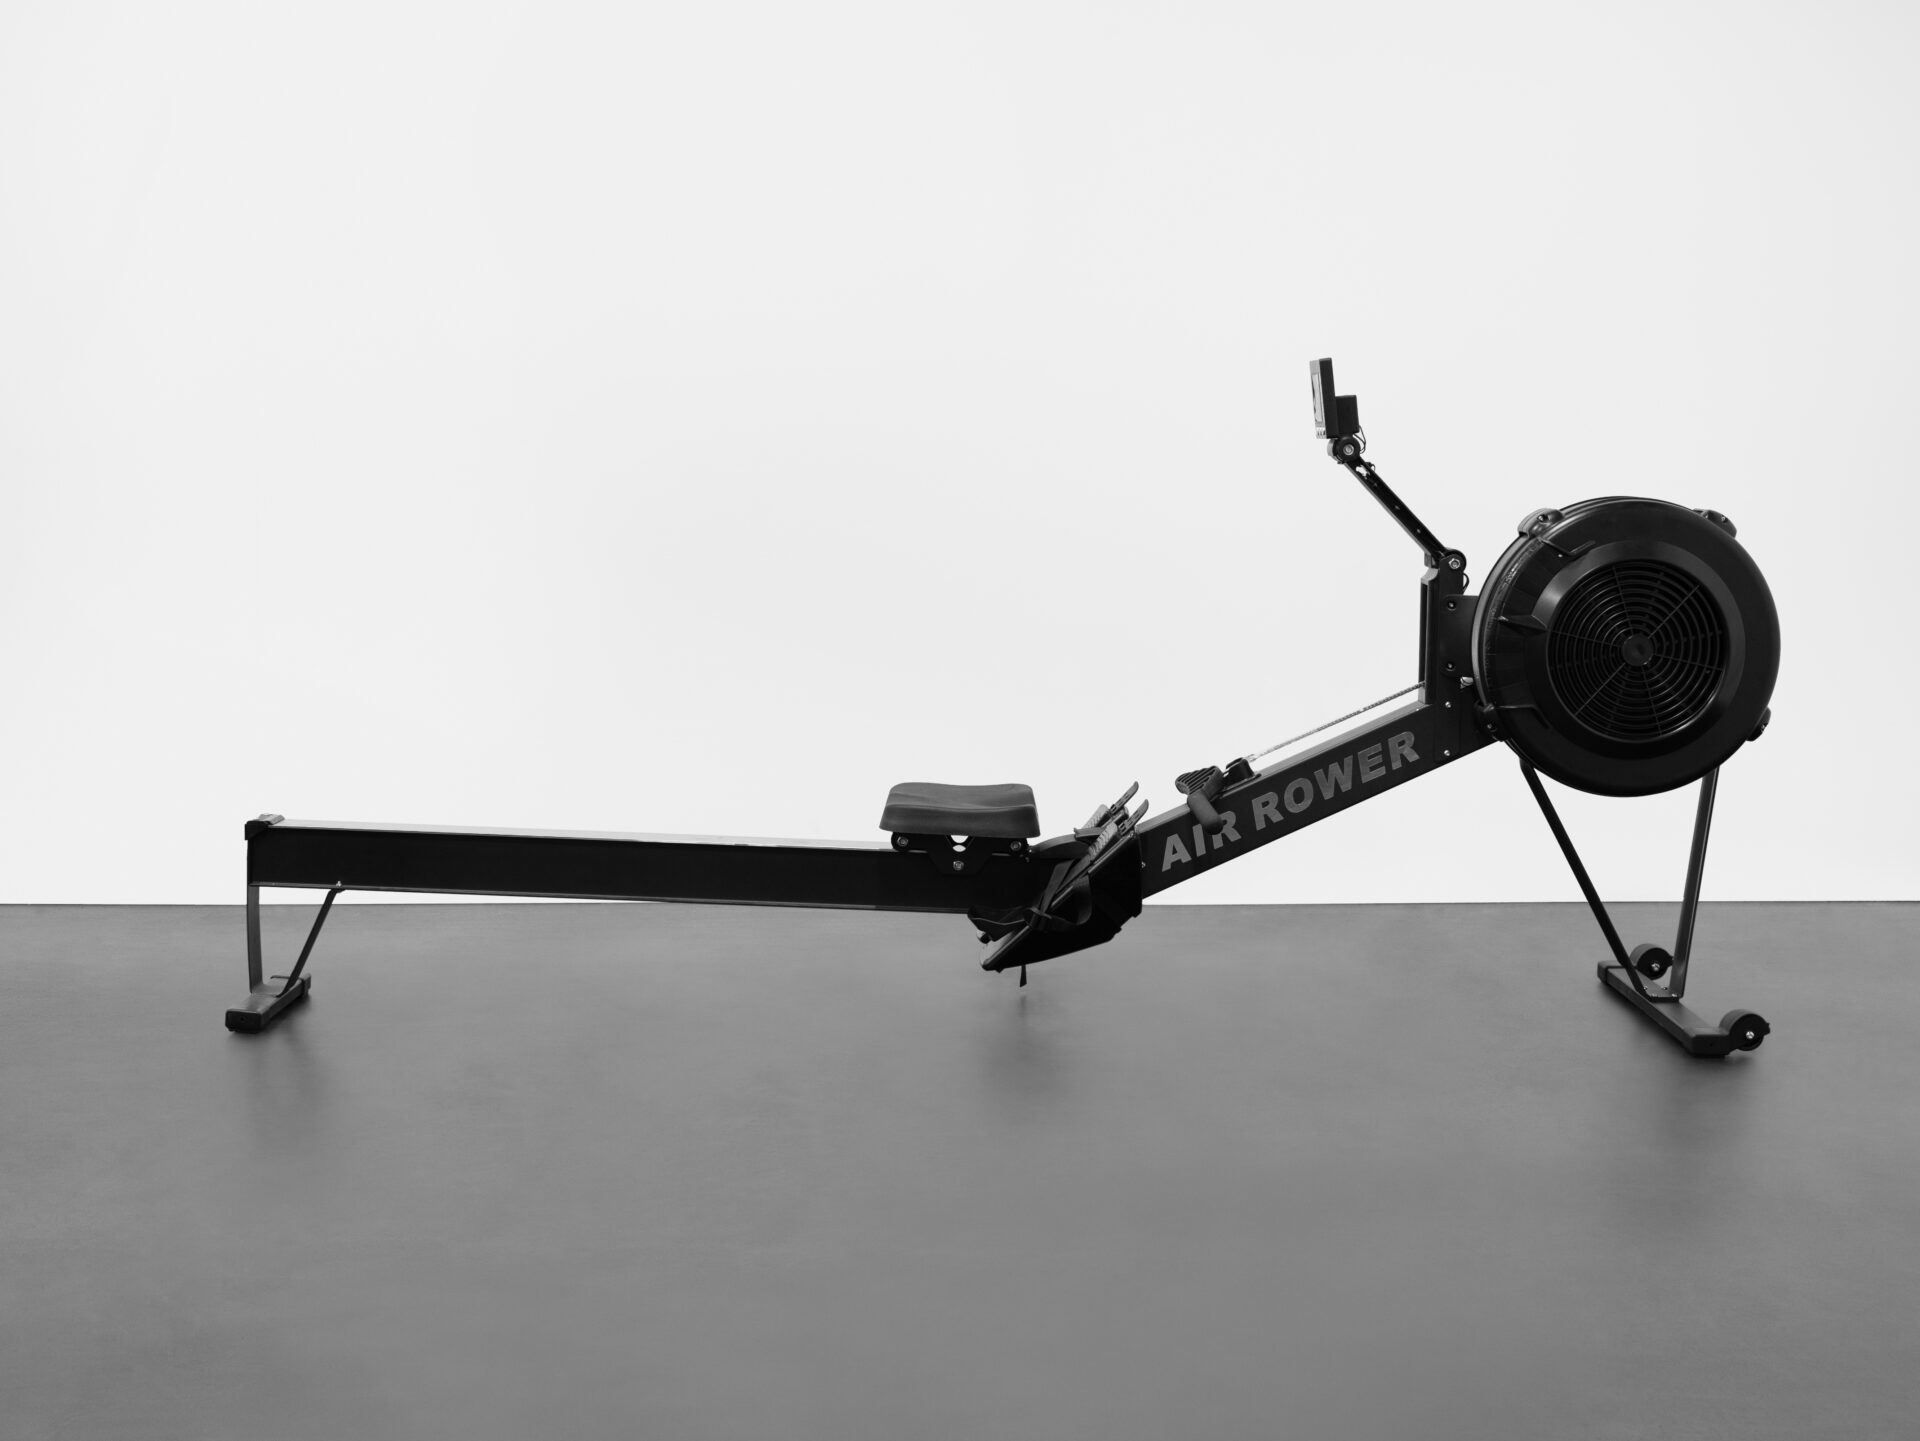 Air Rower AR45 - Workout Equipment Rowing Machine